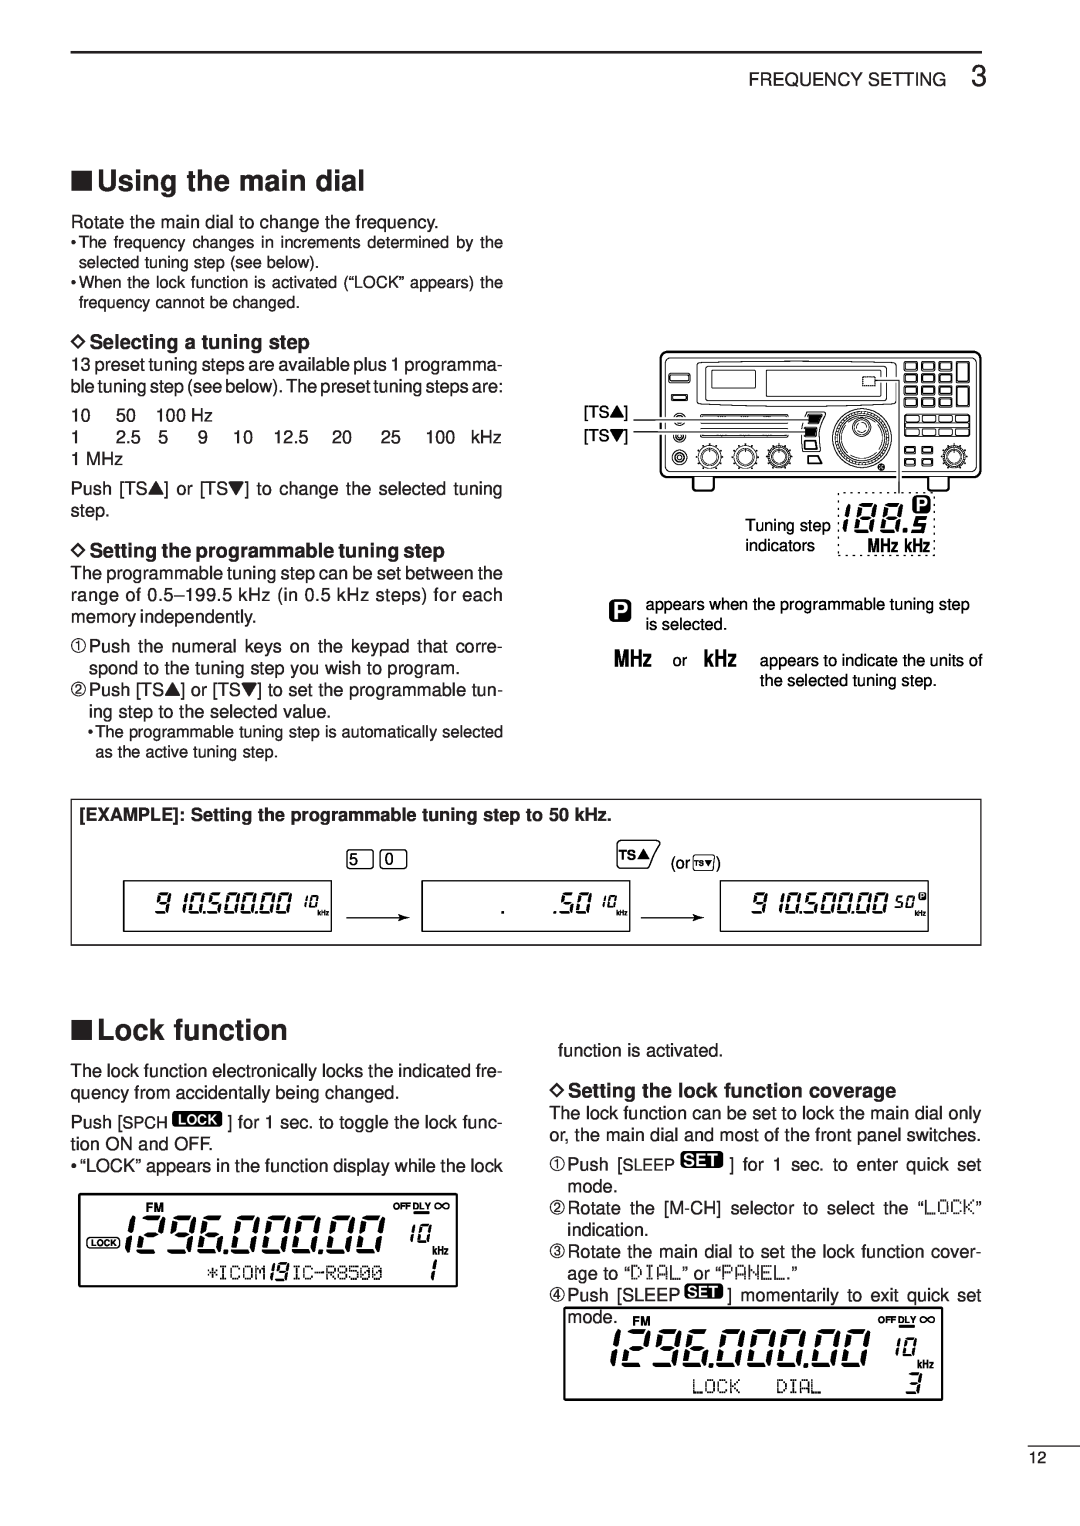 Icom IC-R8500 Using the main dial, Lock function, D Selecting a tuning step, D Setting the programmable tuning step 